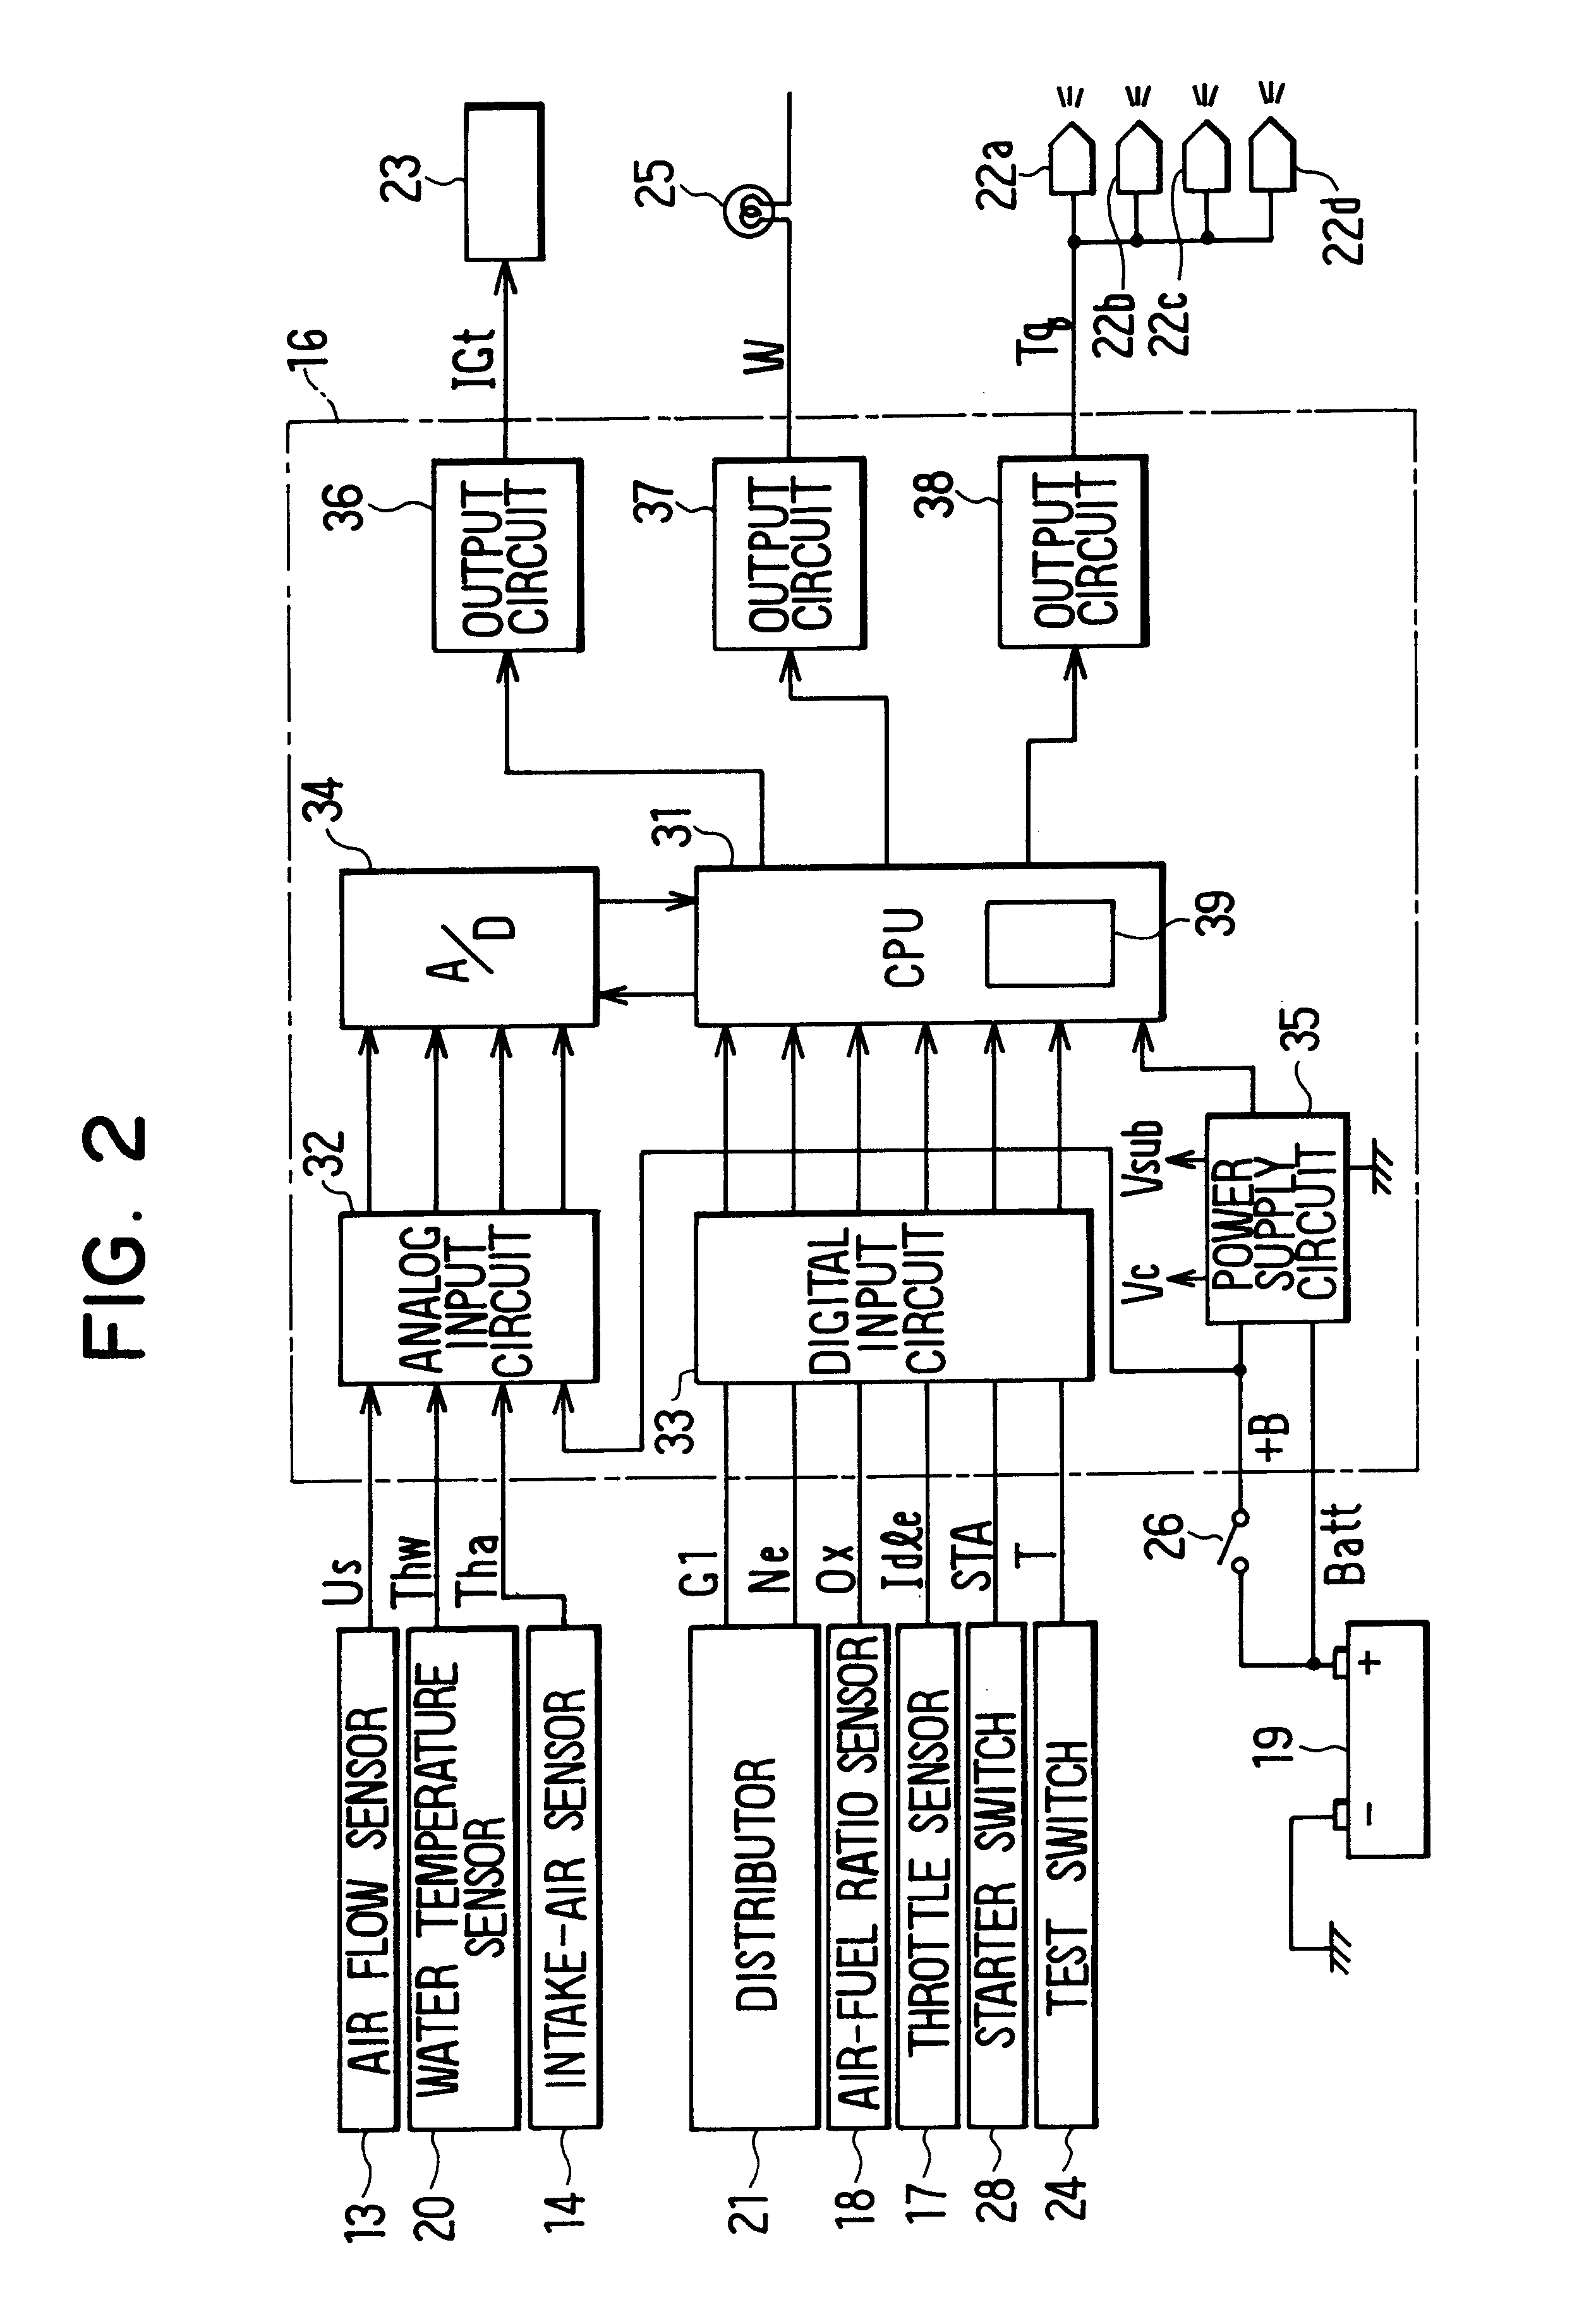 Object-oriented diagnostic apparatus for vehicle controller